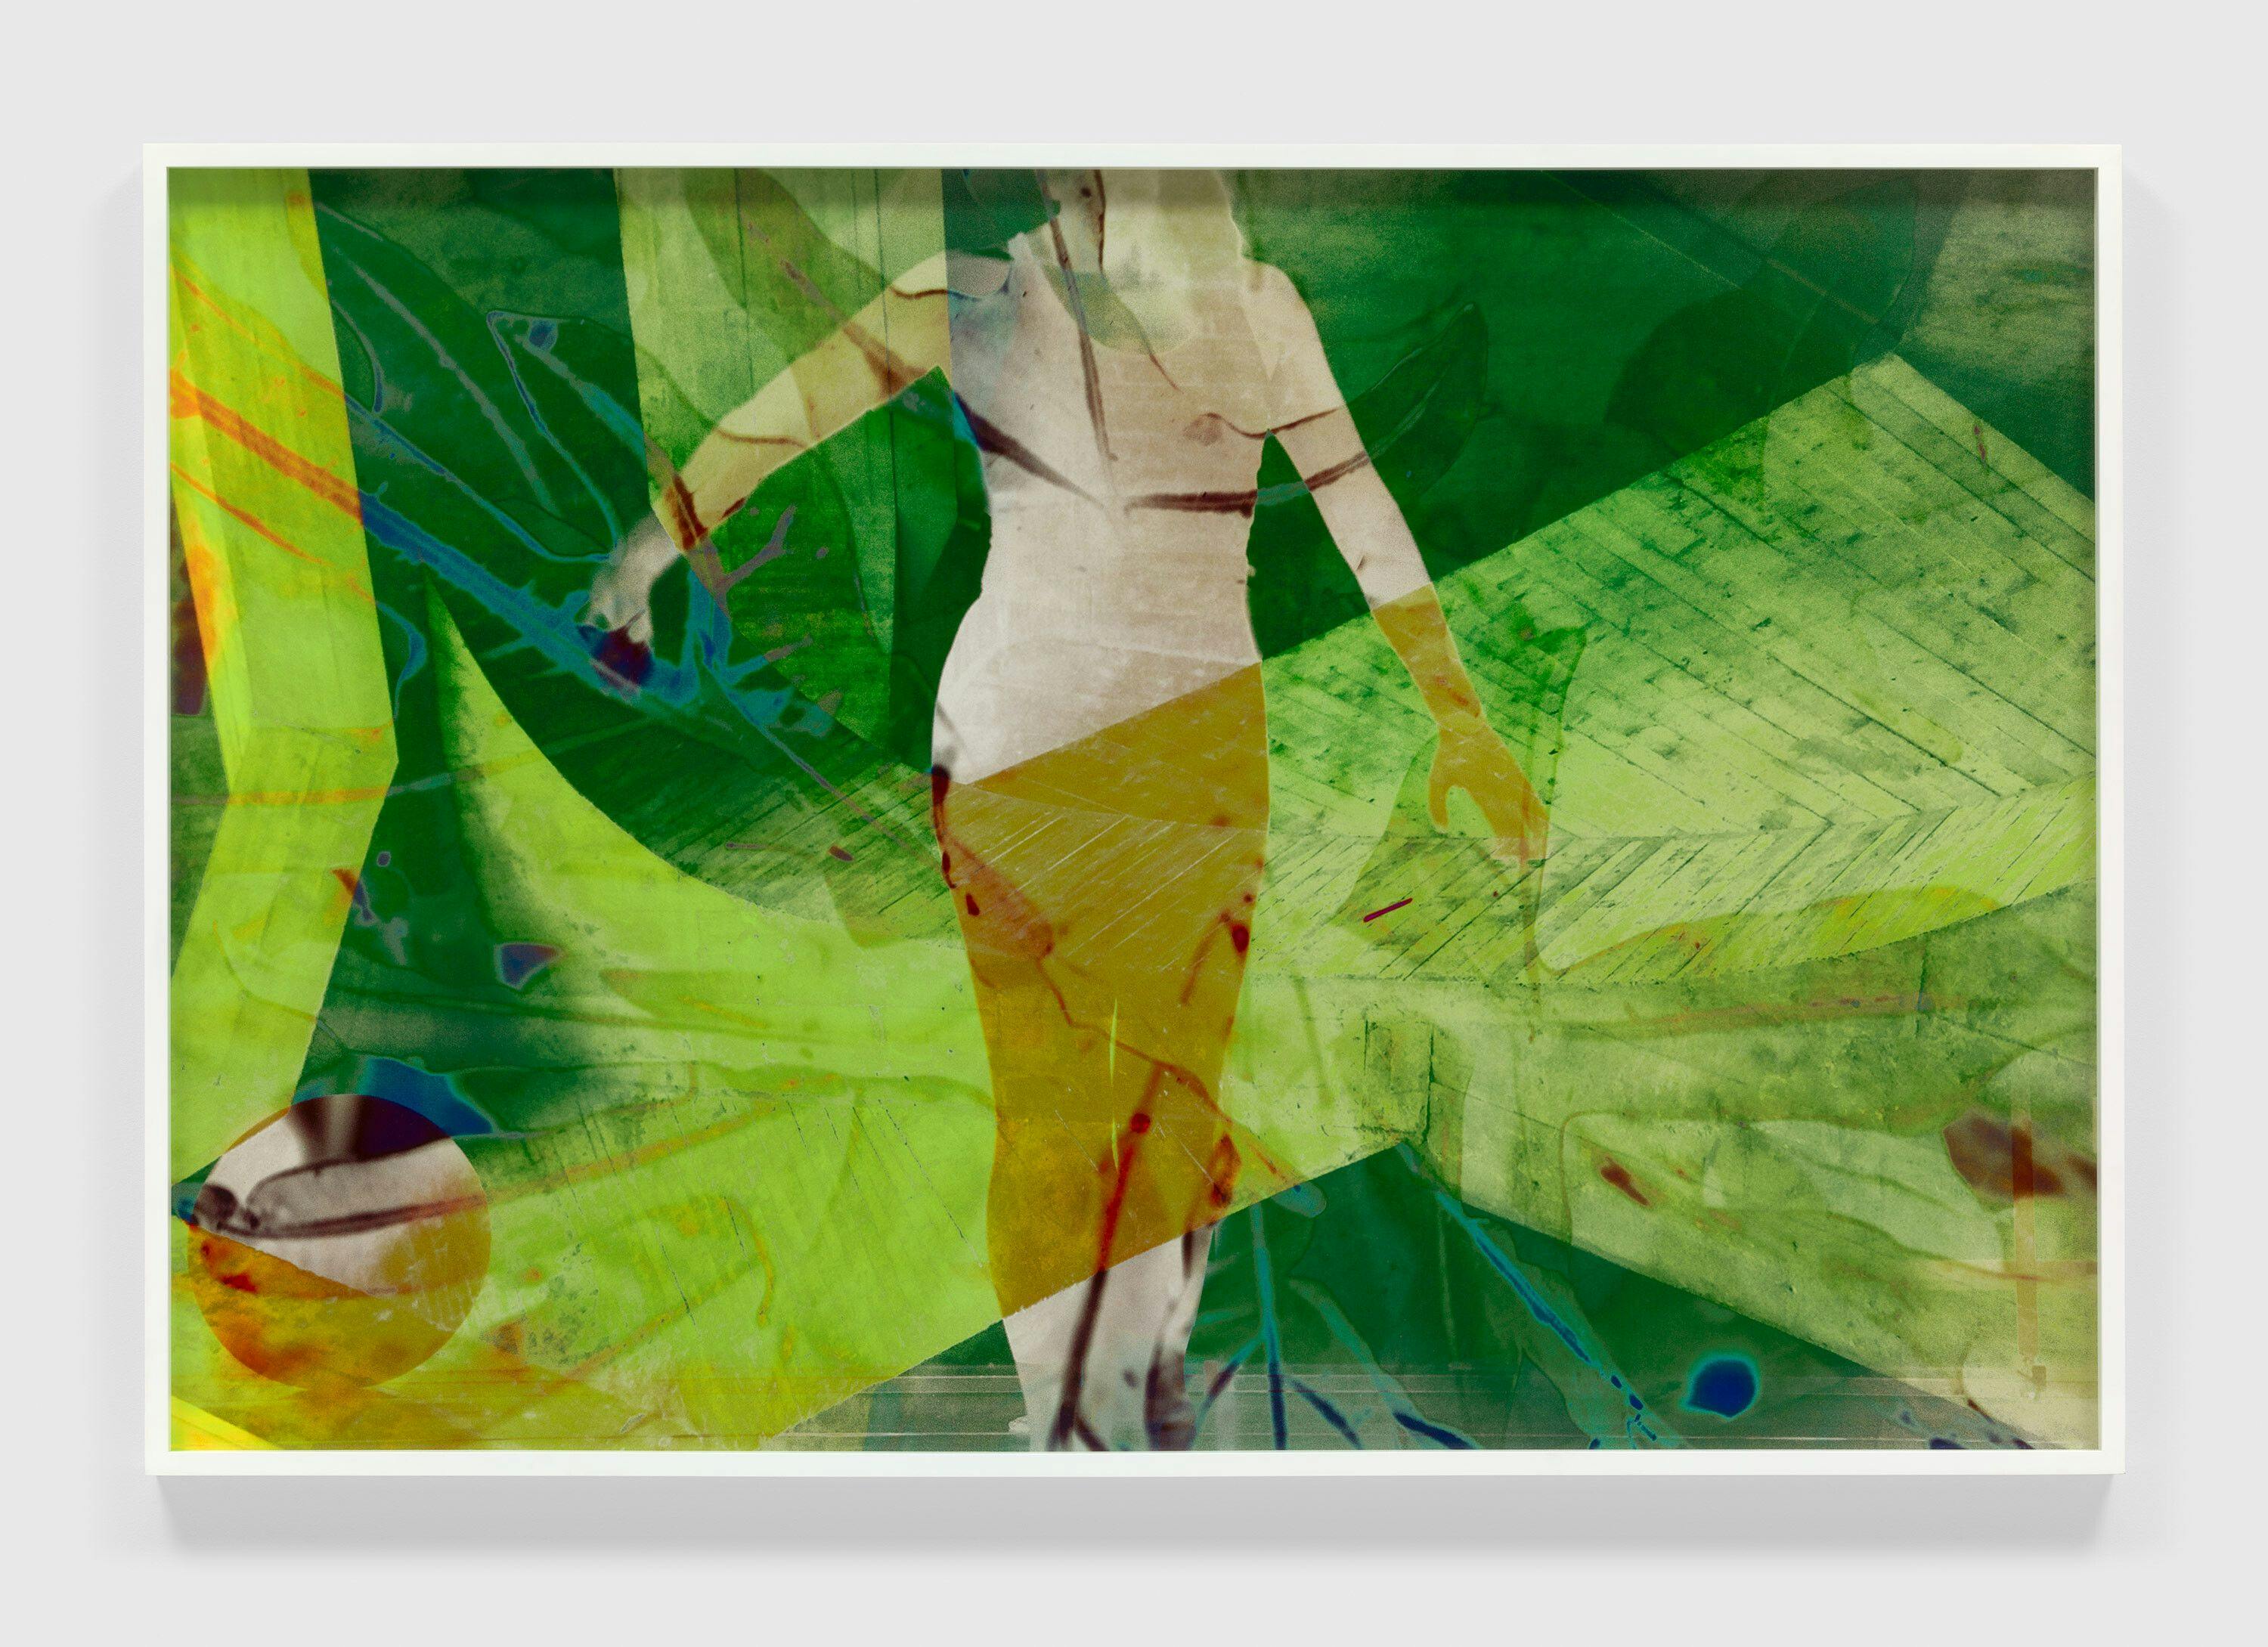 A photograph by James Welling, titled 0123, dated 2015.